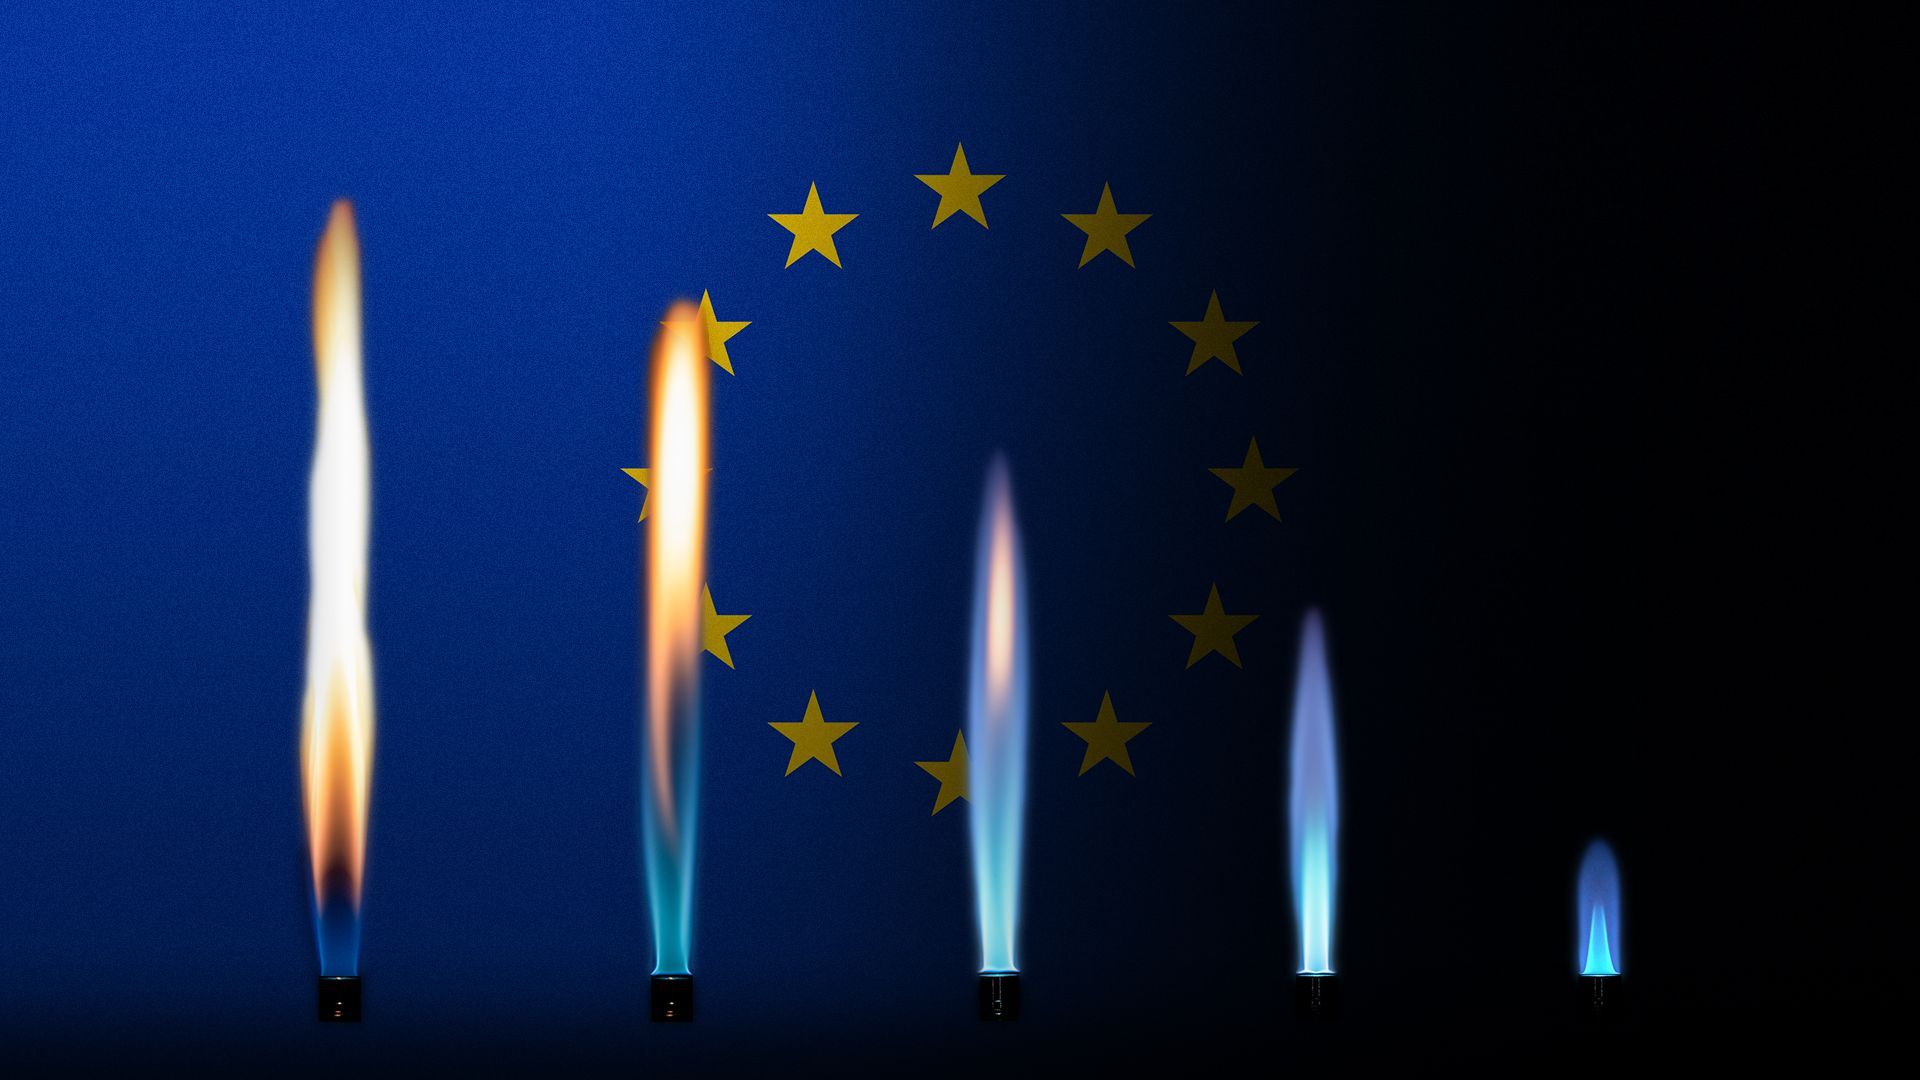 Illustration of a series of natural gas flames getting smaller in size as the EU flag in the background becomes dark without the light